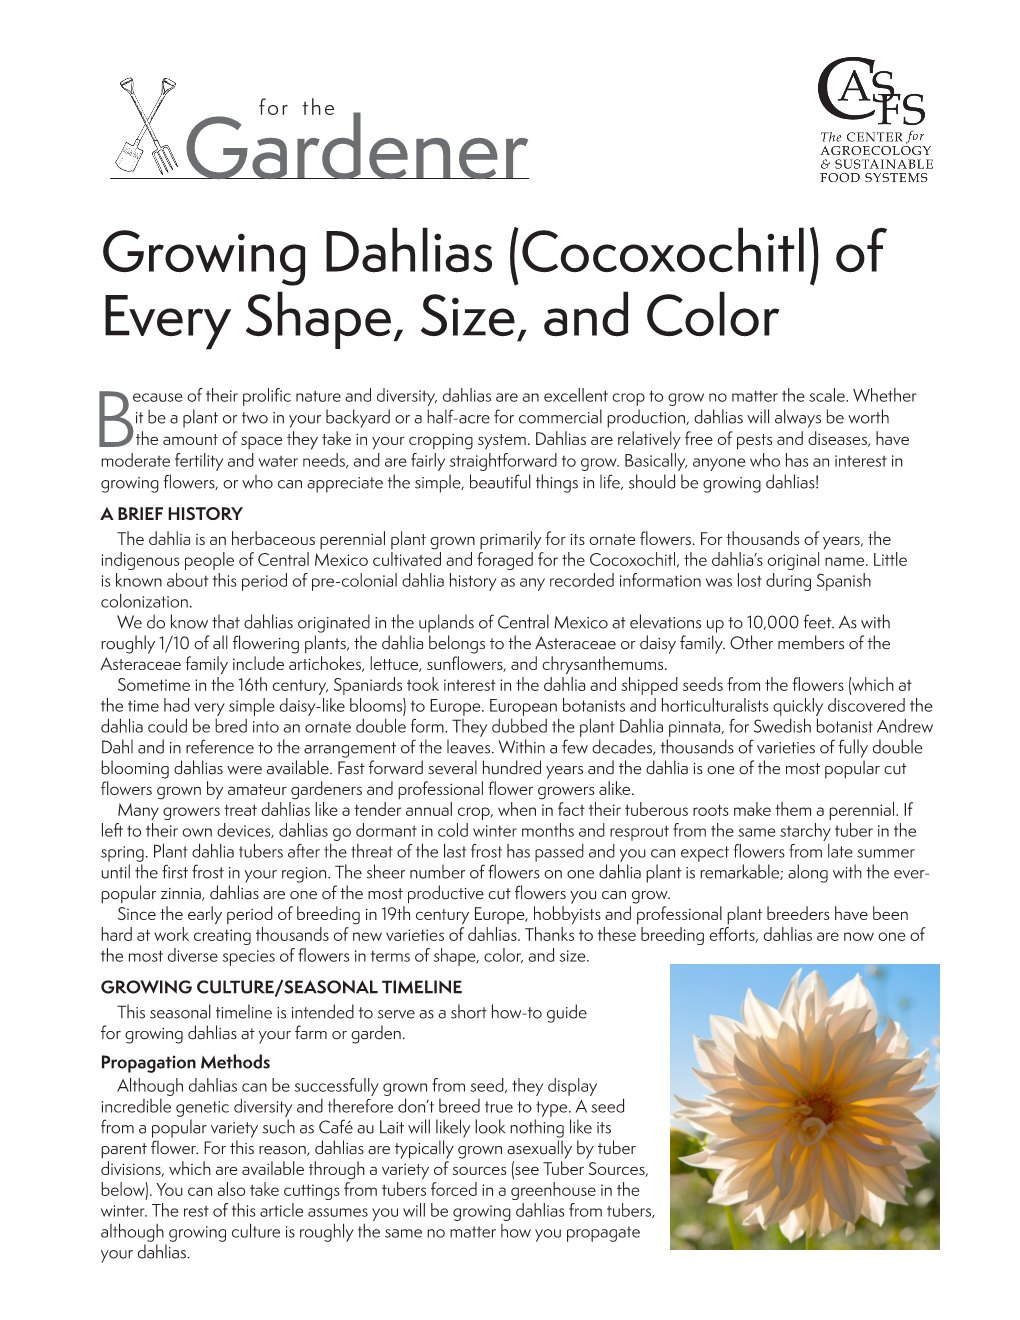 Growing Dahlias (Cocoxochitl) of Every Shape, Size, and Color